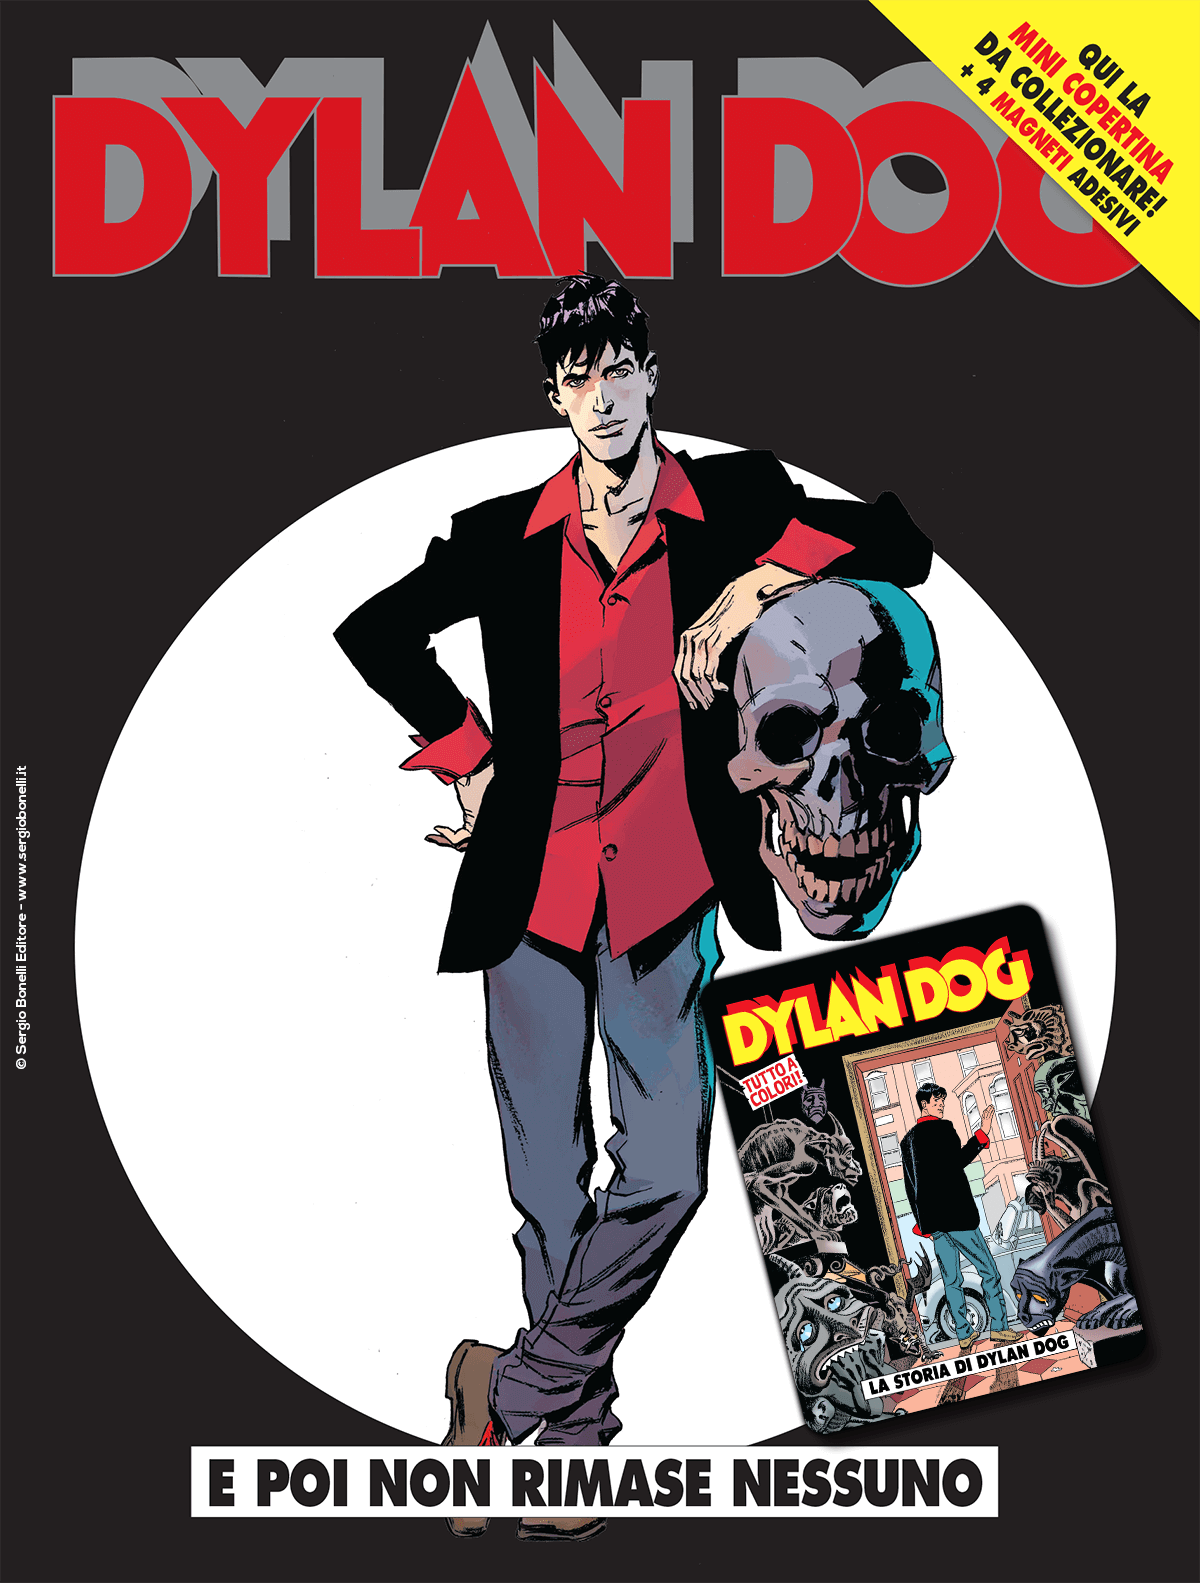 DYLAN DOG 440 VARIANT DELITTO A SORROW MANOR - (COVER B - DYLAN DOG #100)